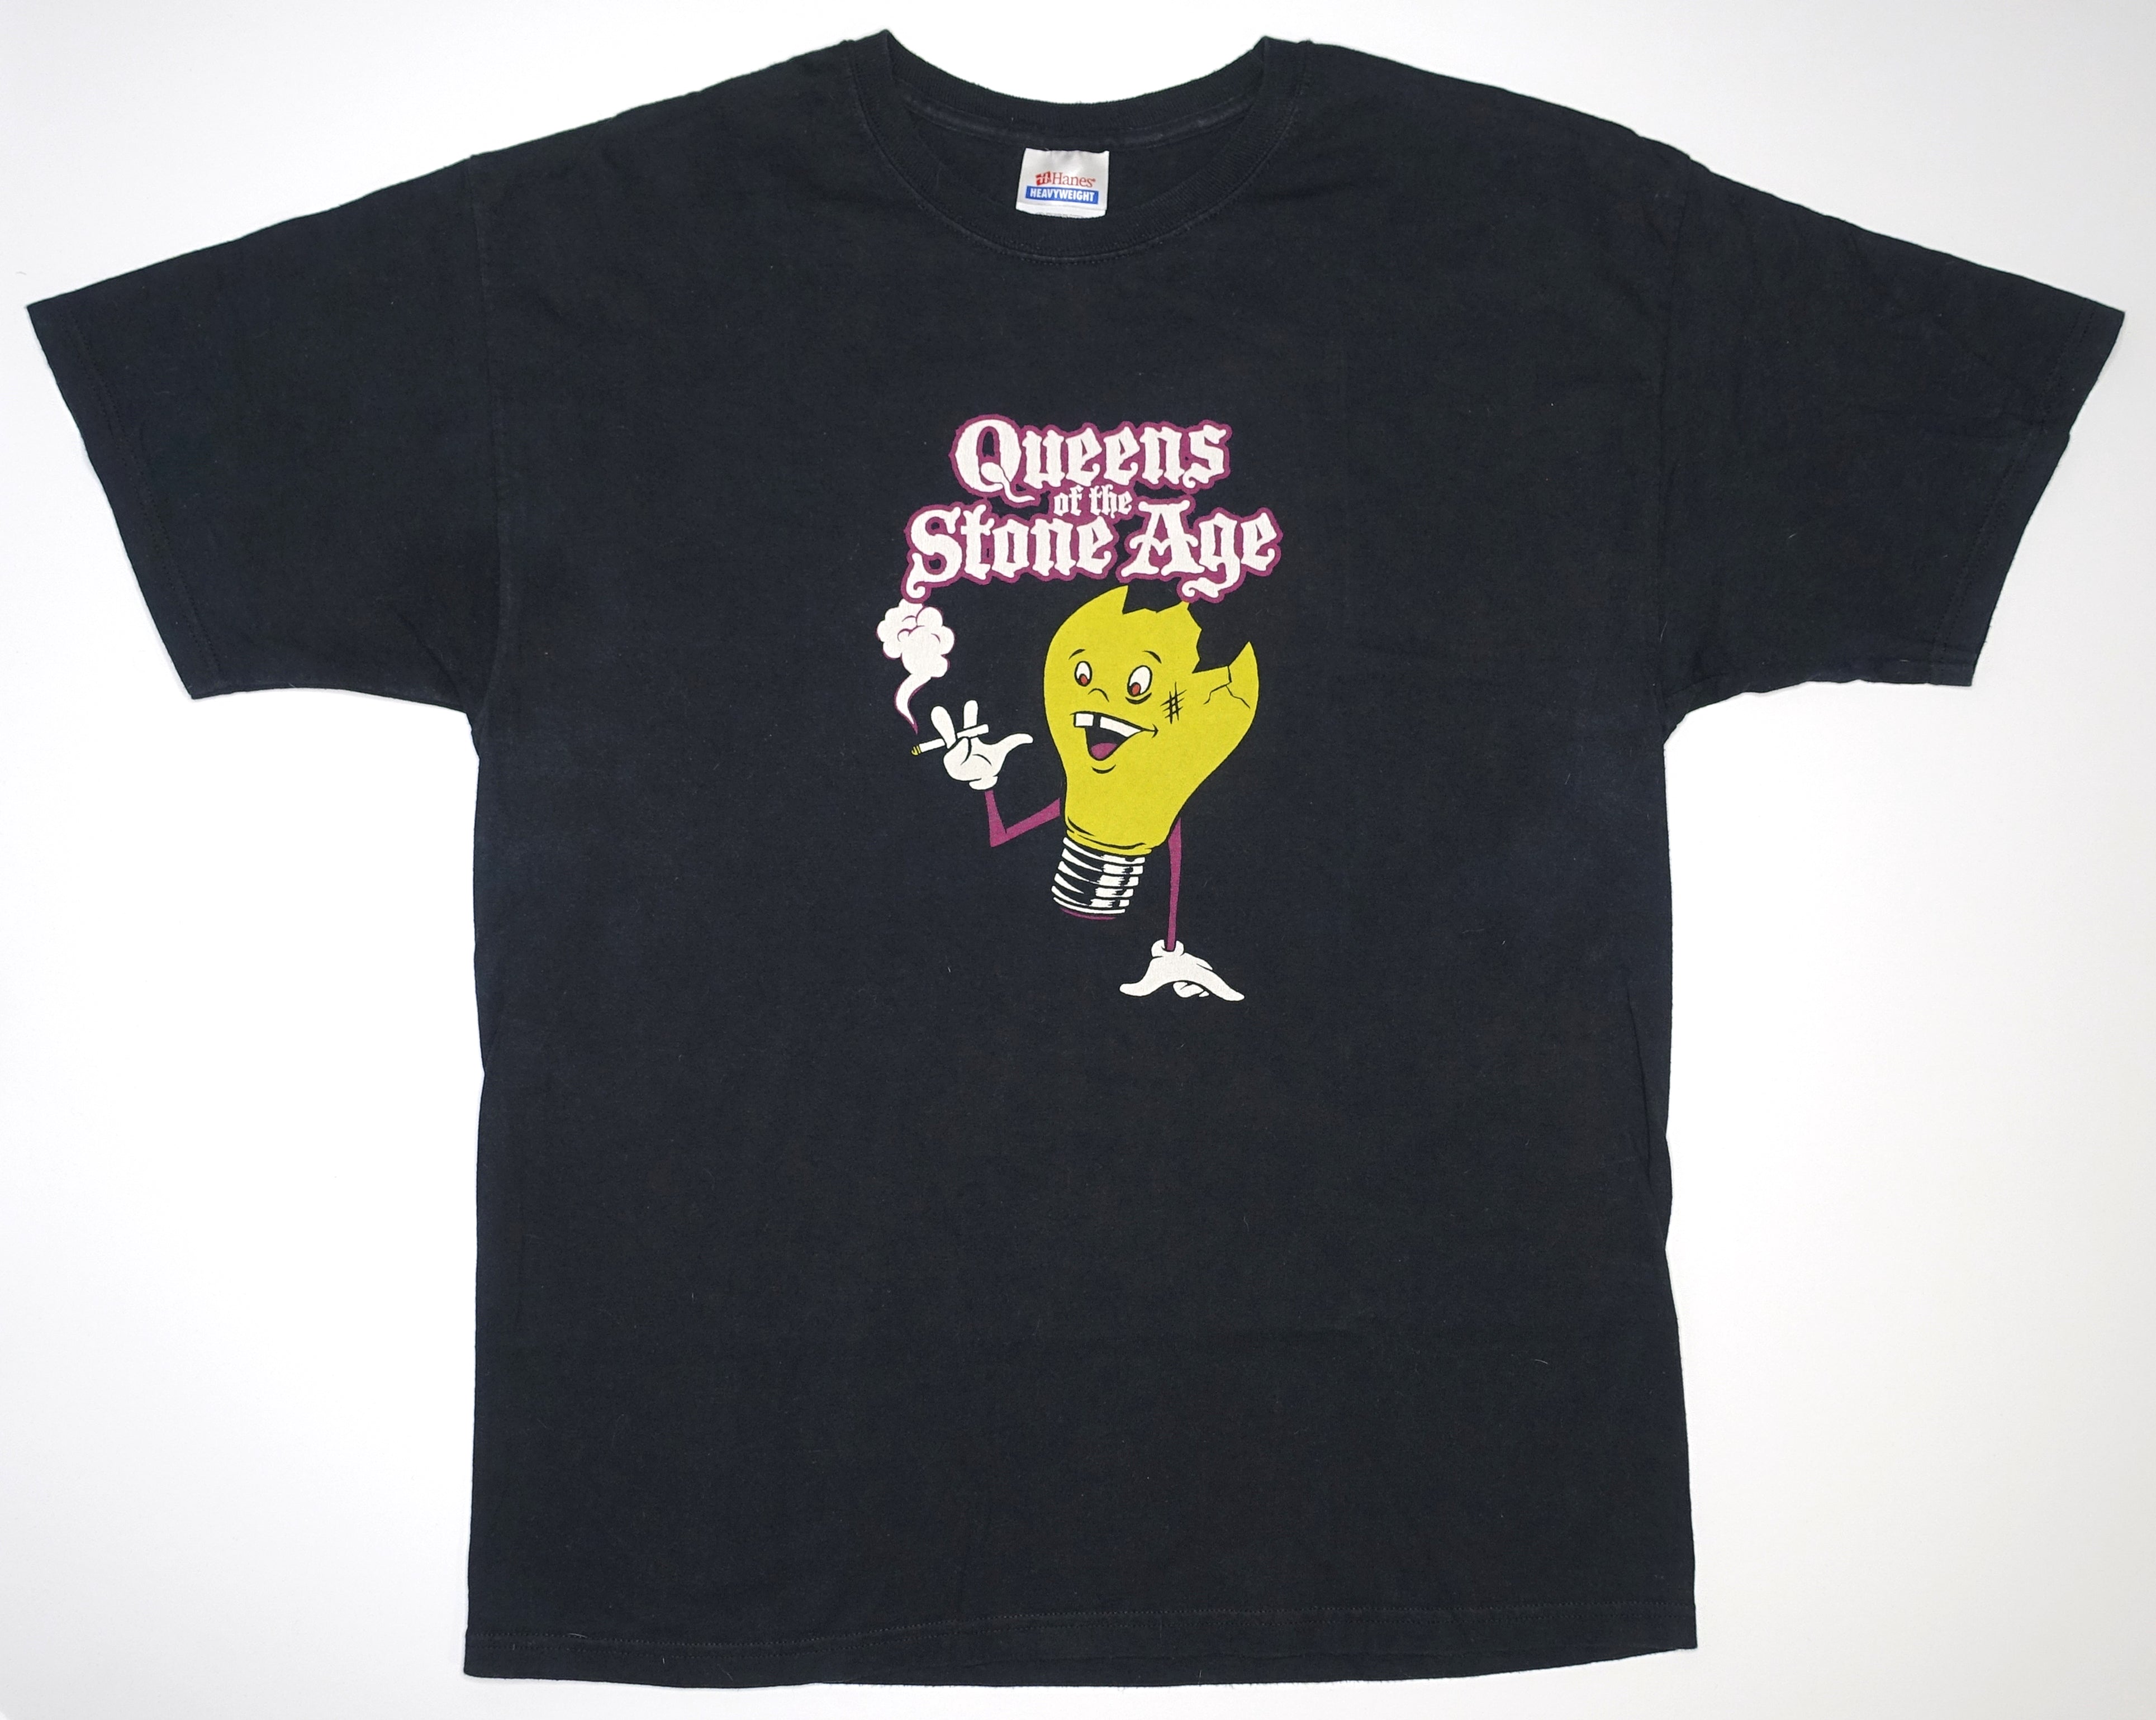 Queens Of The Stone Age – Era Vulgaris  2007 Tour Shirt Size Large